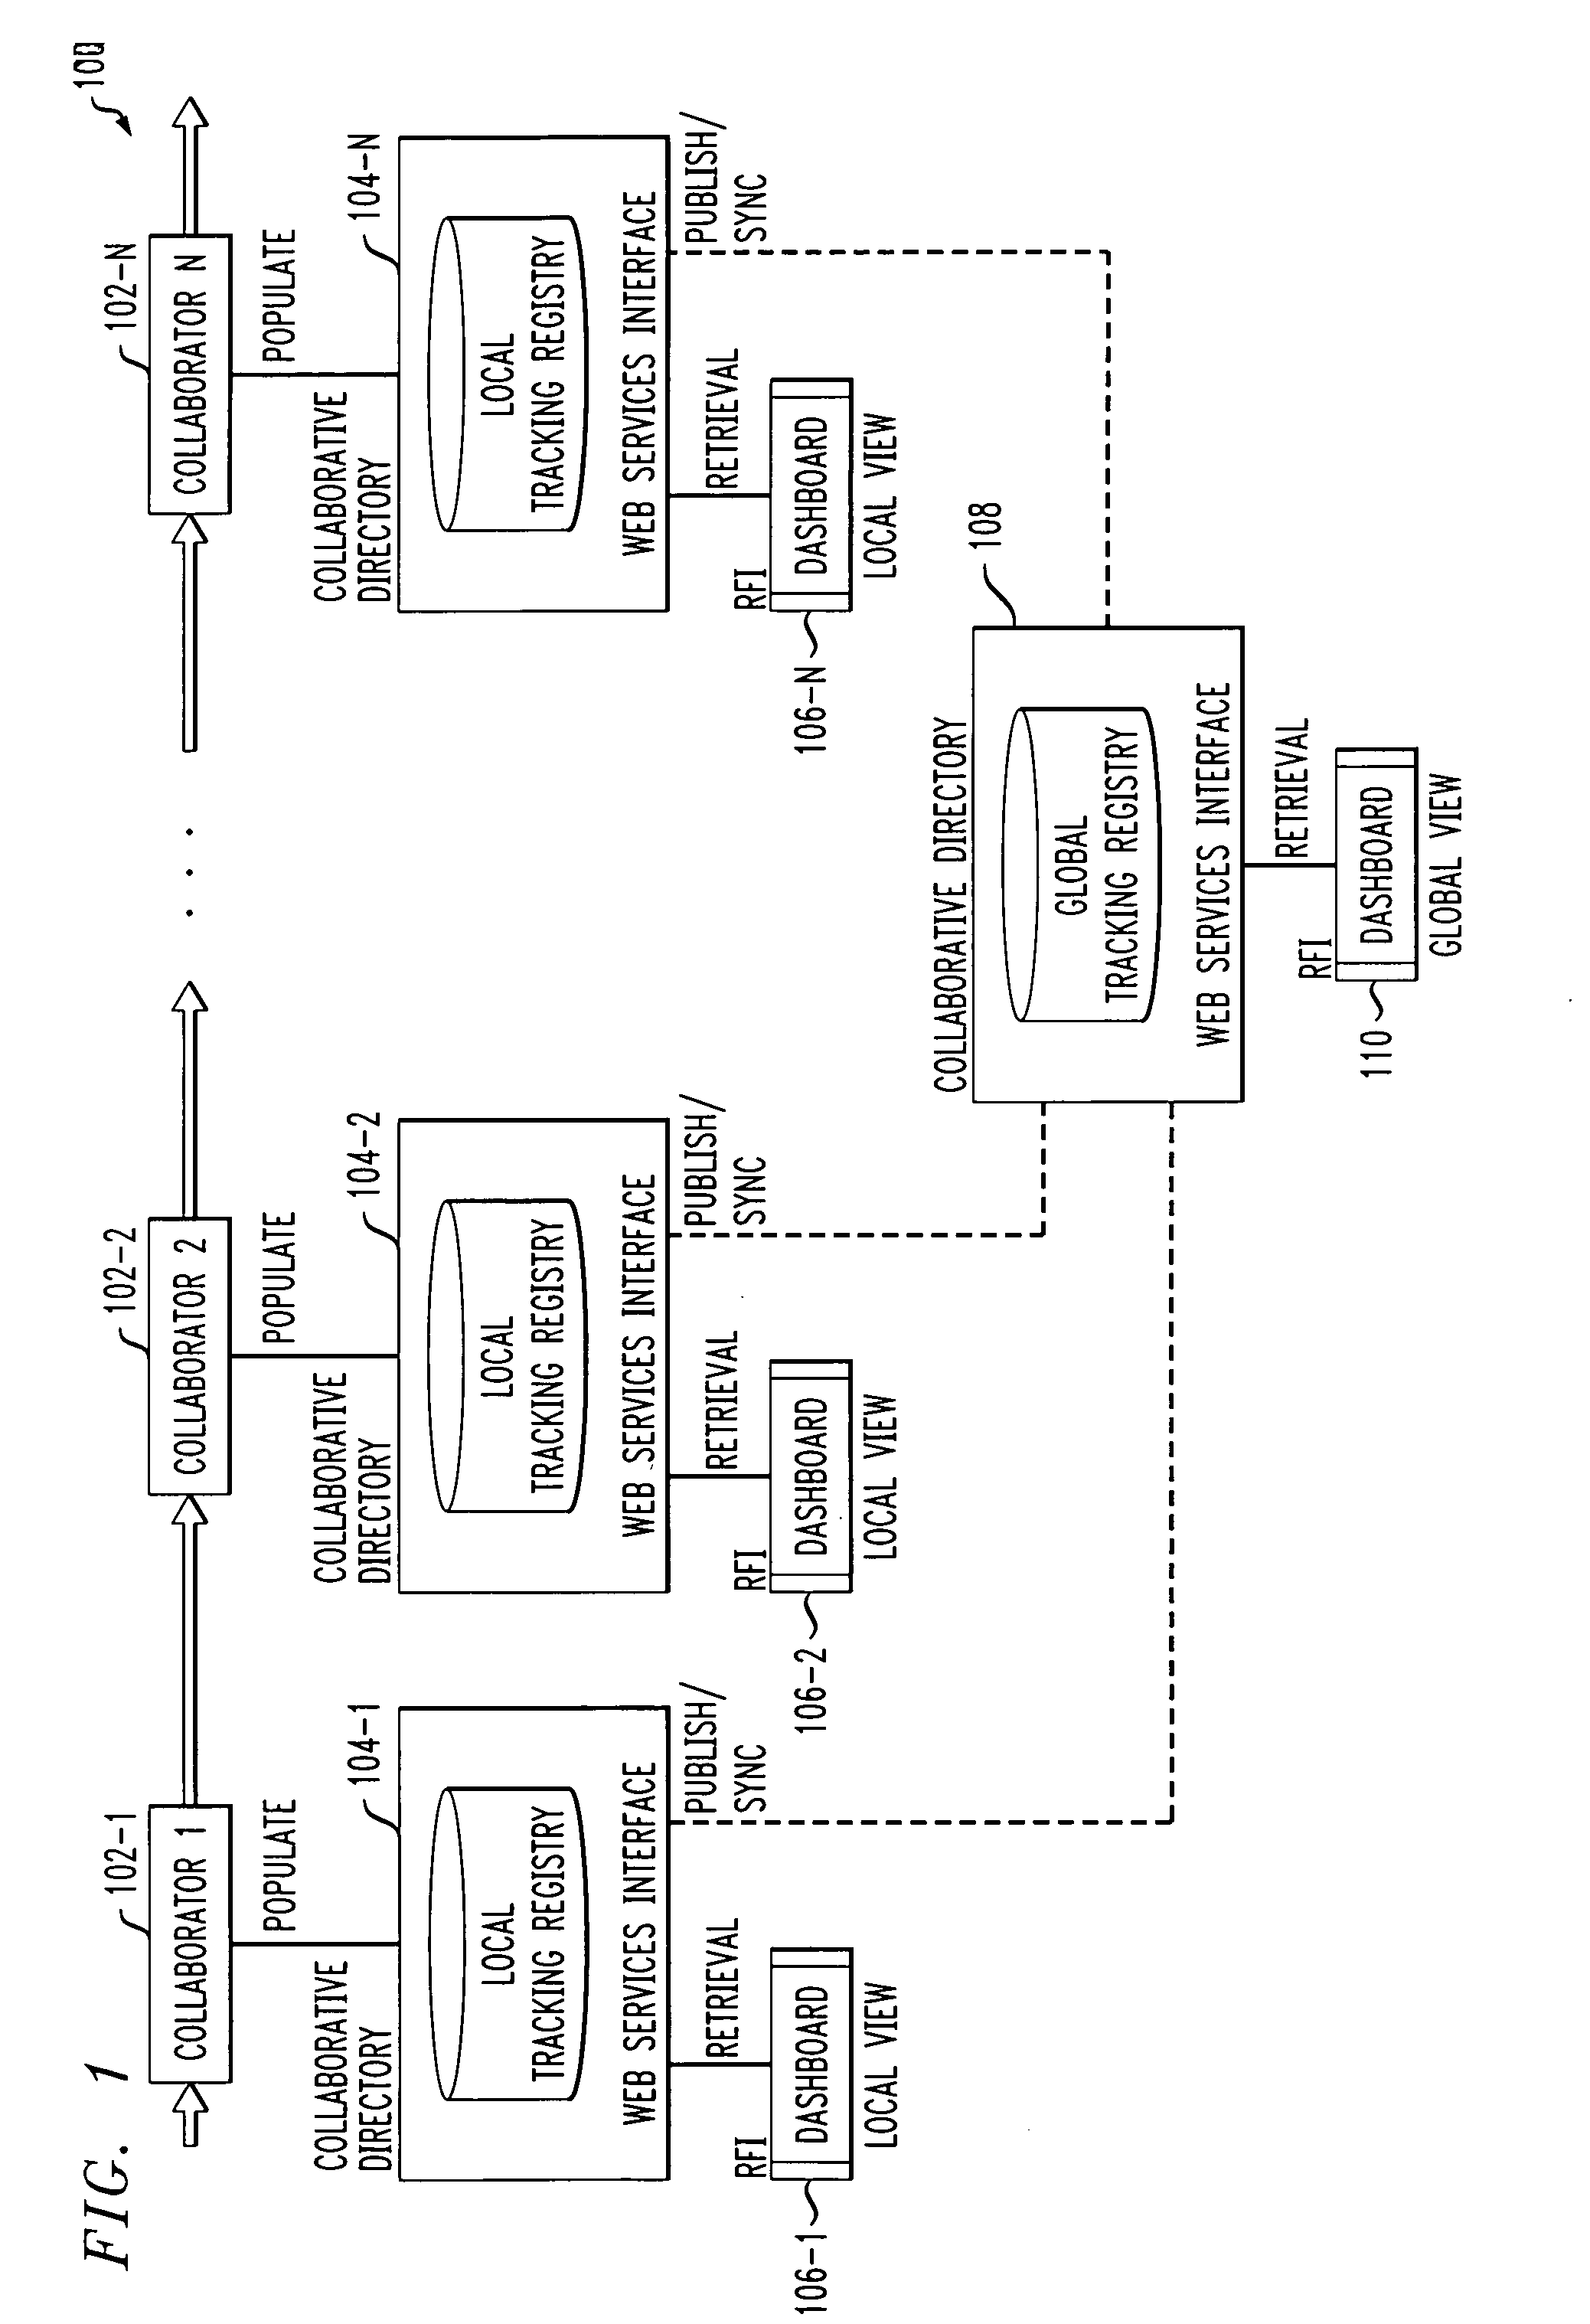 Methods and apparatus for decision support activation and management in product life cycle management